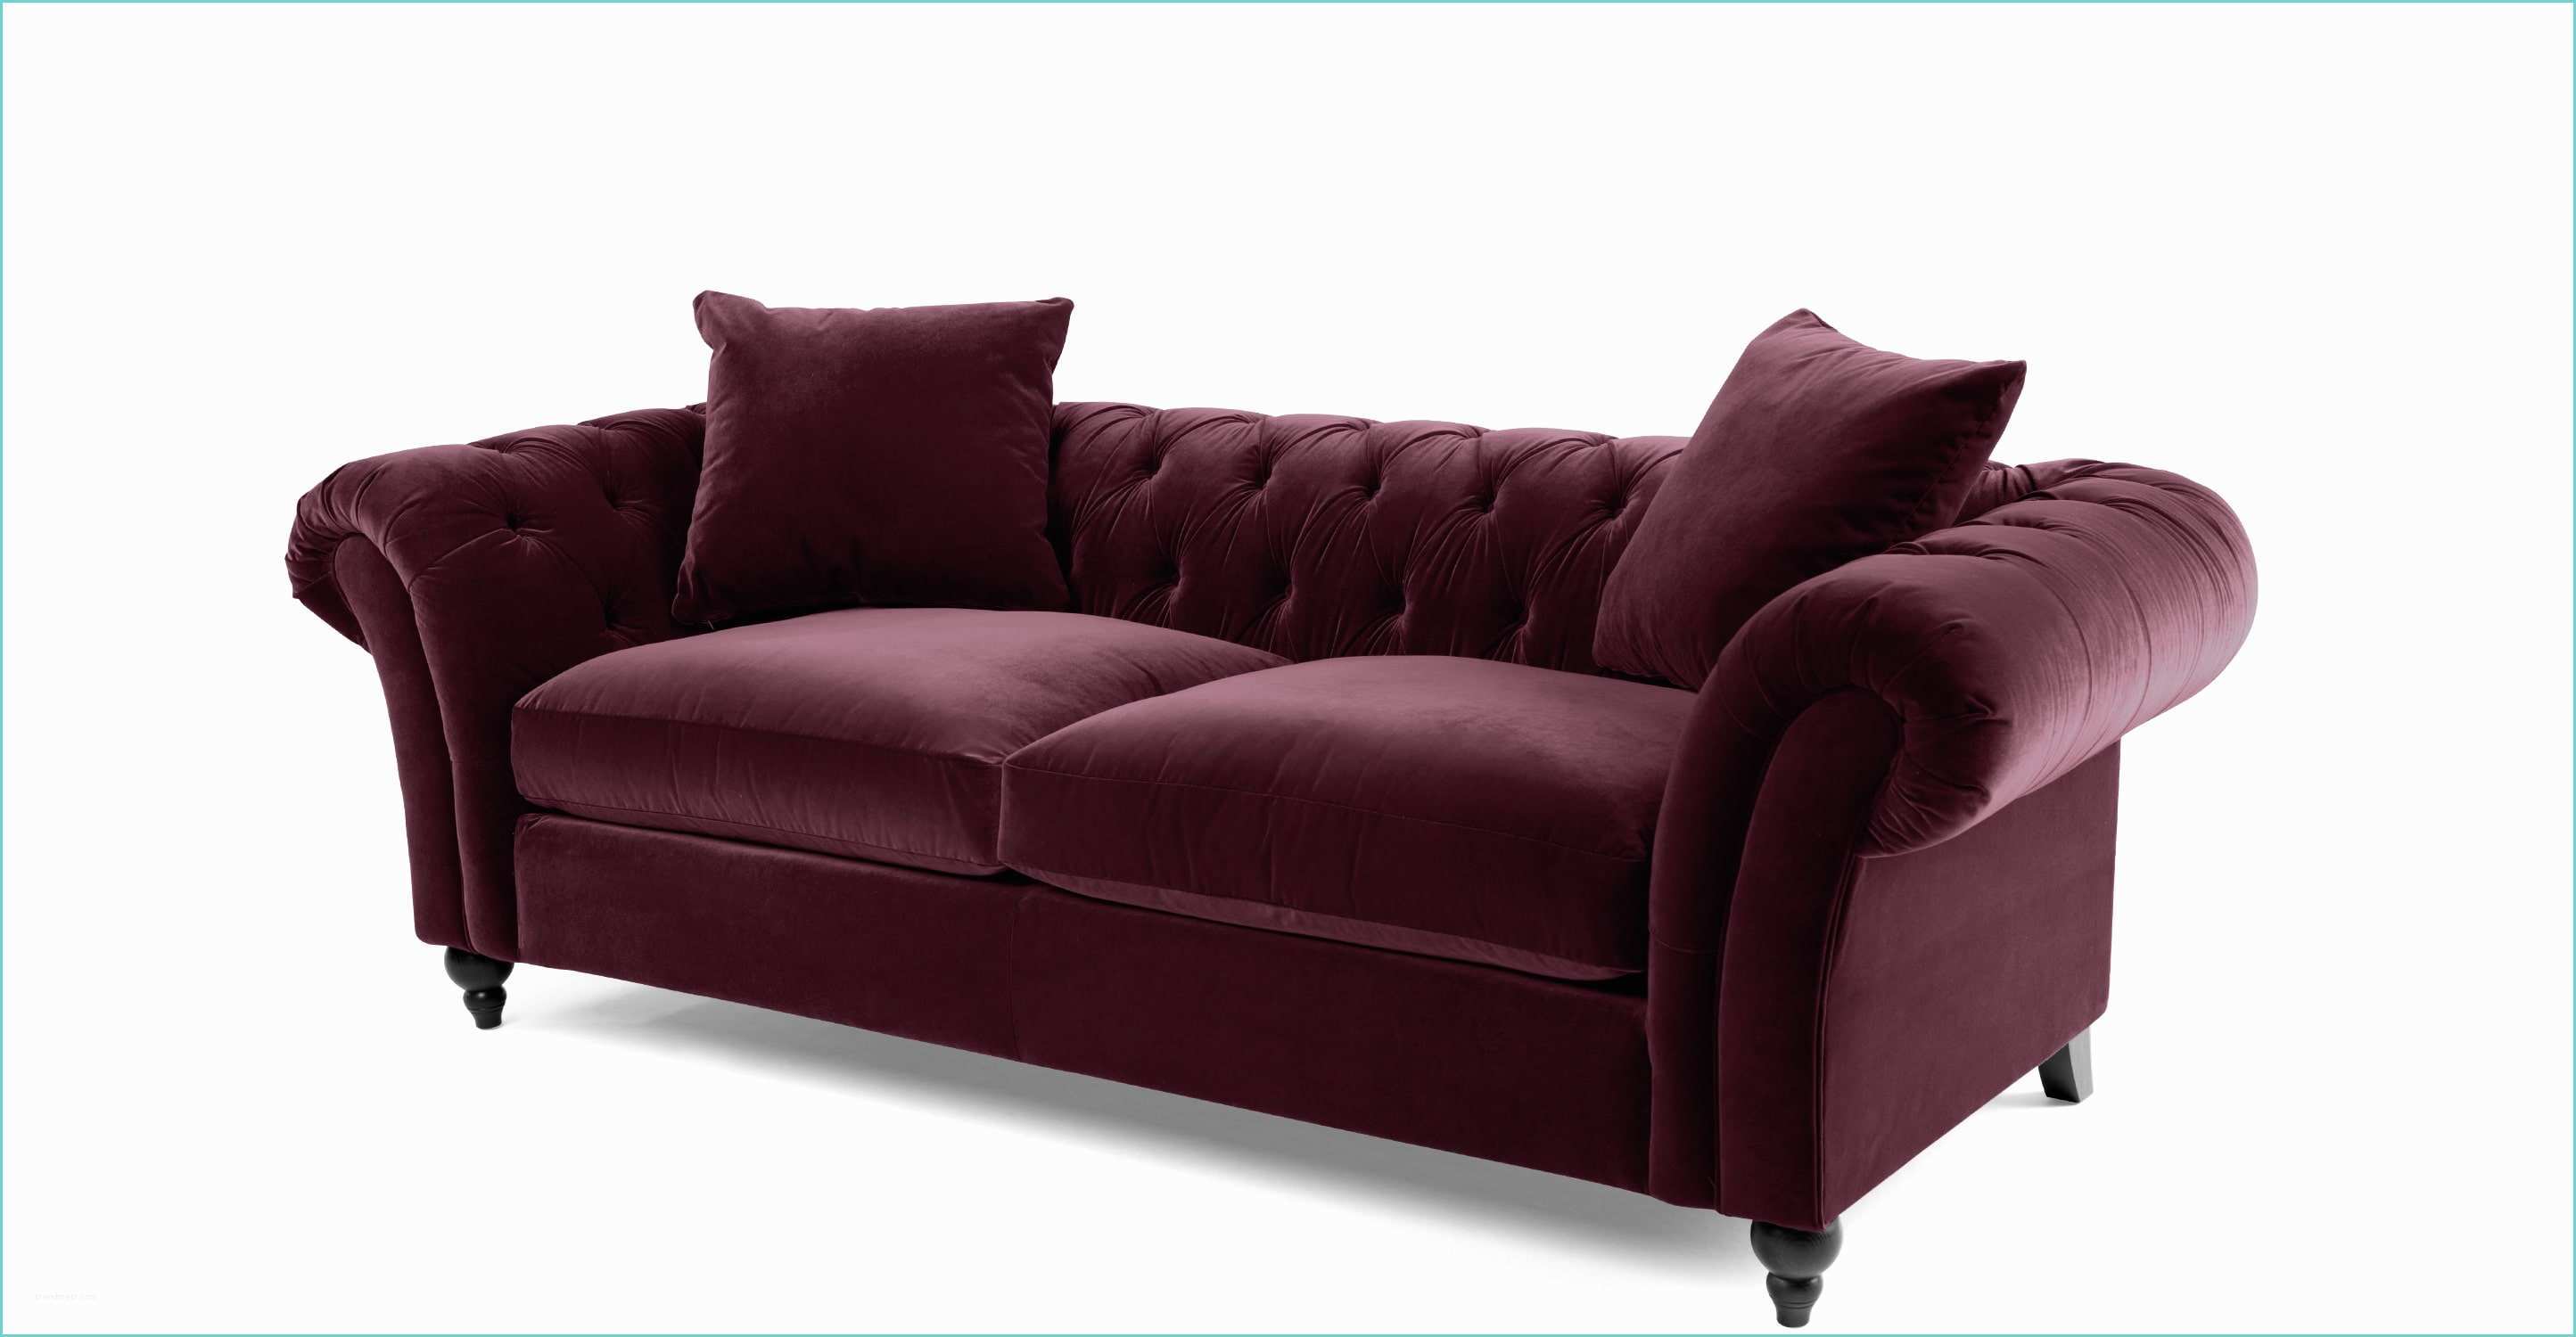 Canap Chesterfield Velours Rouge Bardot Canapé Chesterfield 3 Places Velours Rouge Merlot